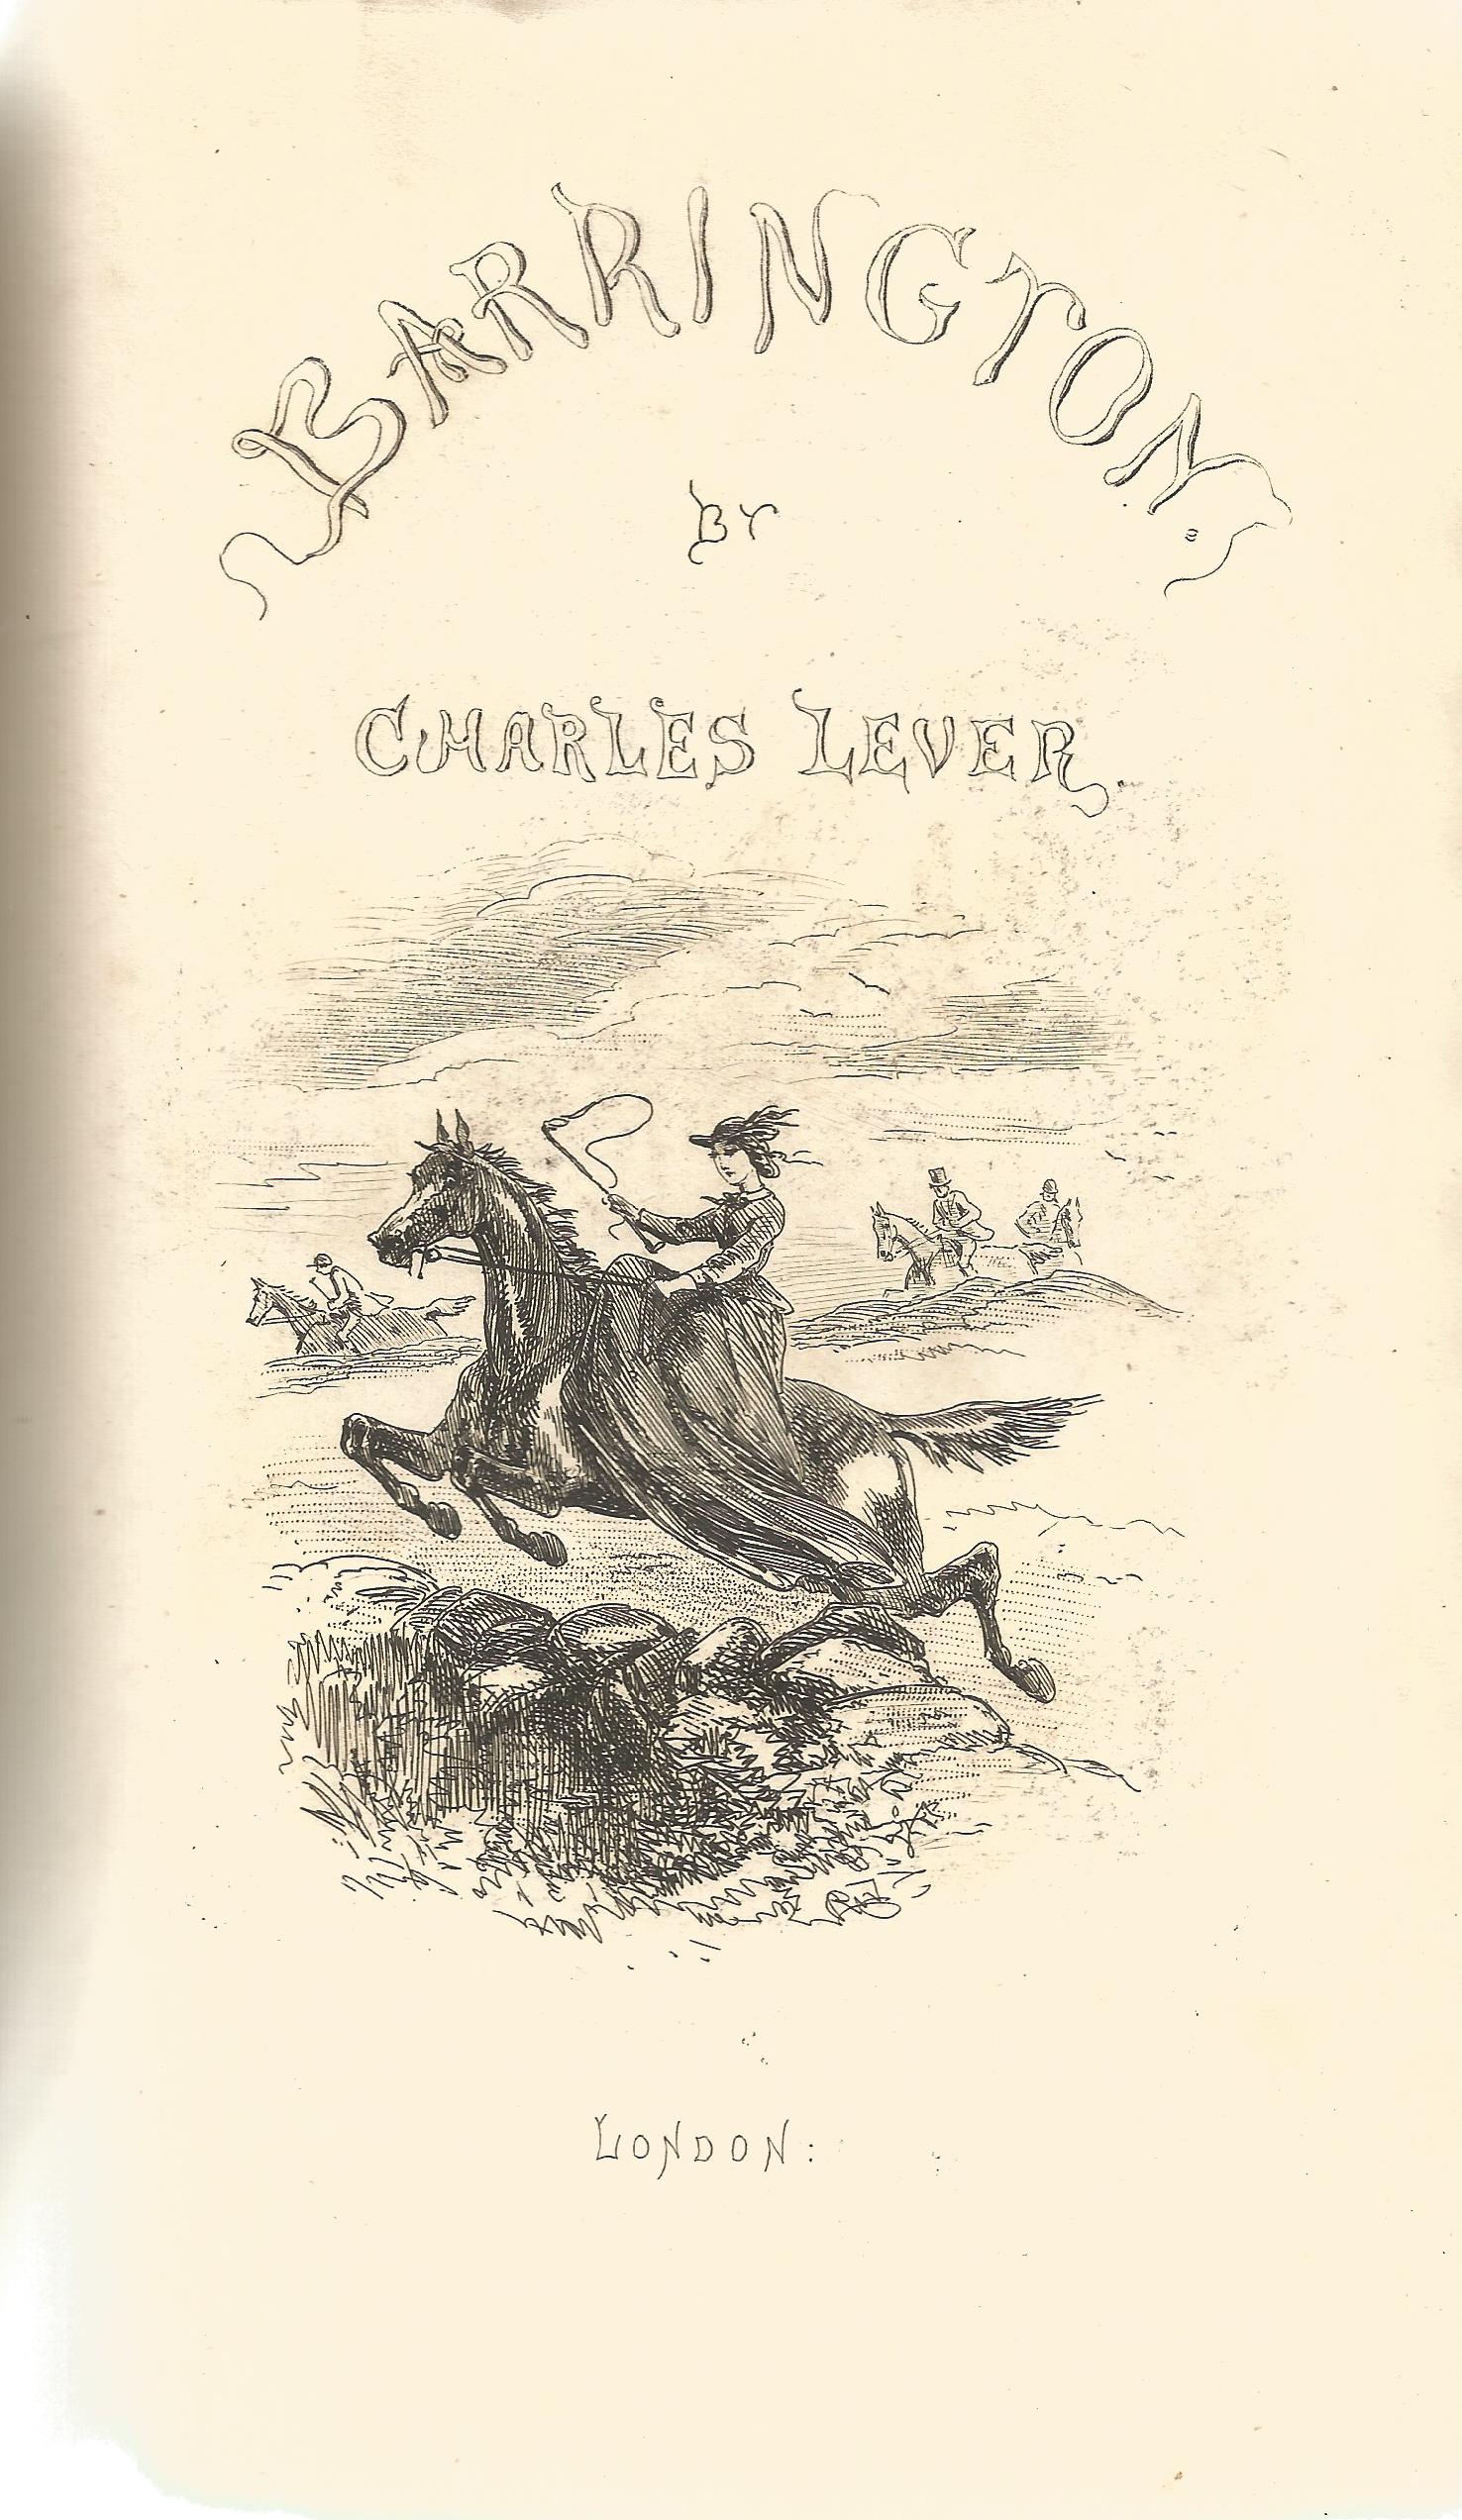 Barrington by Charles Lever Hardback Book 1872 New Edition published by Chapman and Hall some ageing - Image 2 of 3